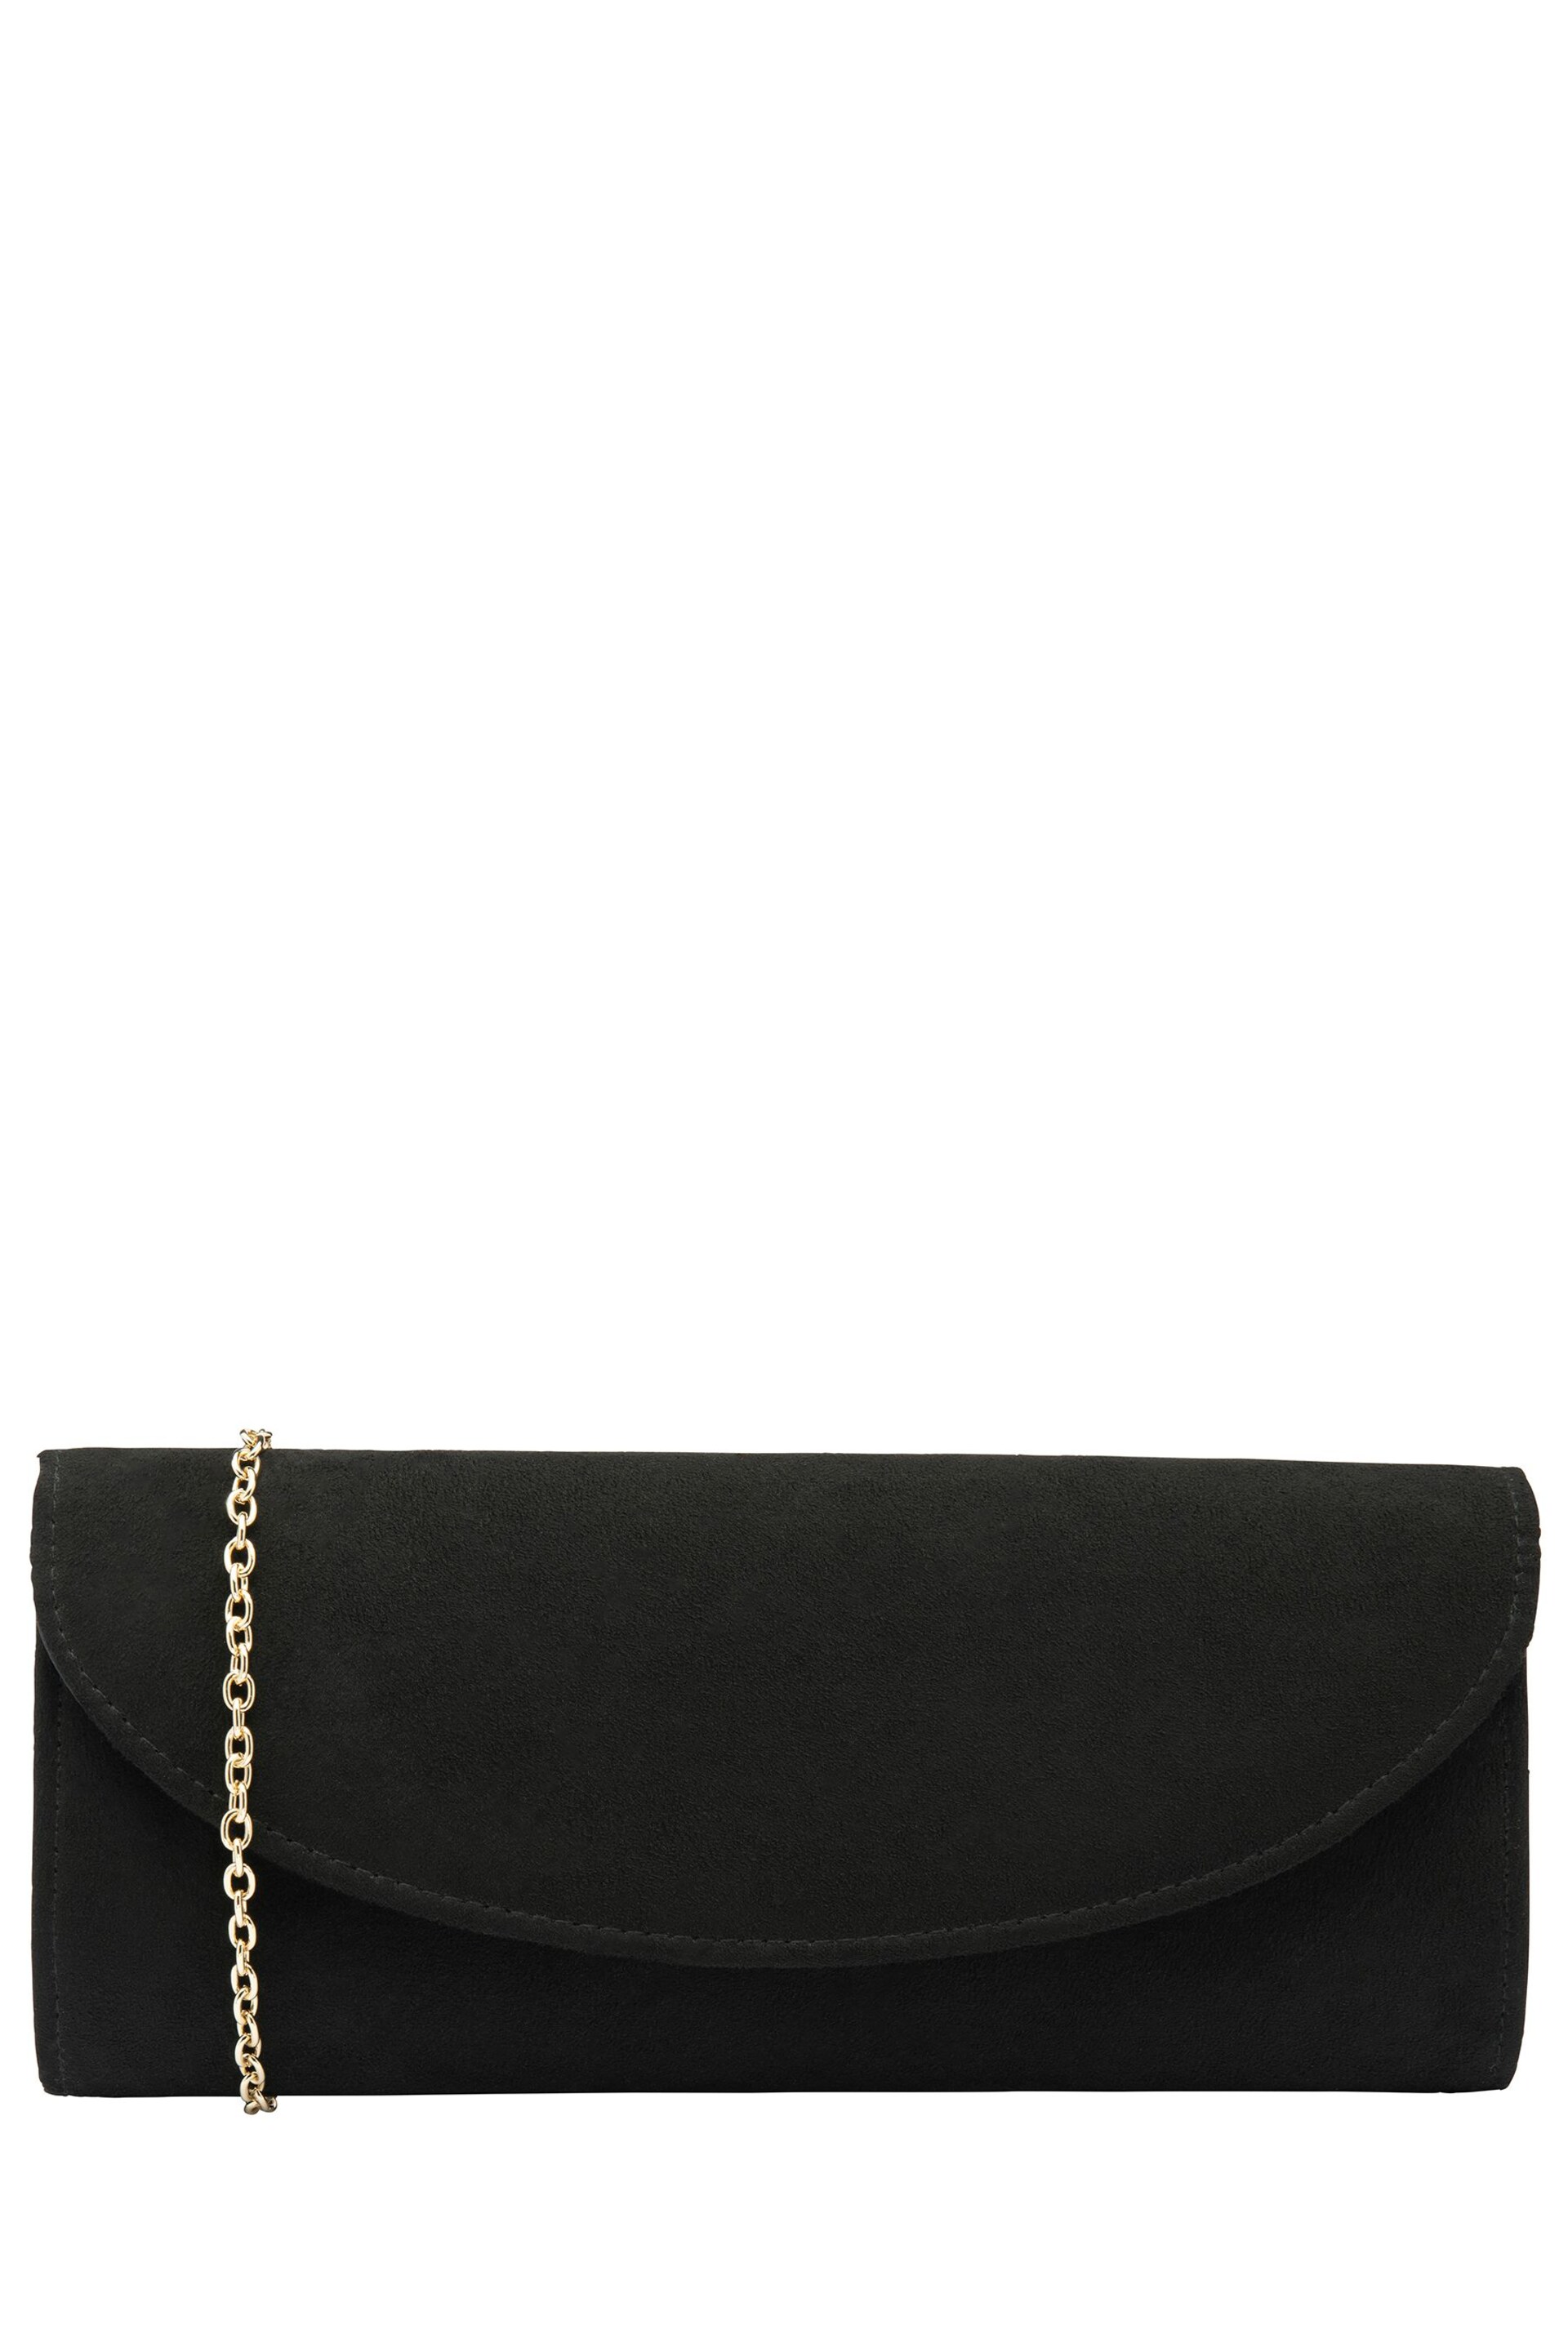 Lotus Black Clutch Bag with Chain - Image 1 of 4